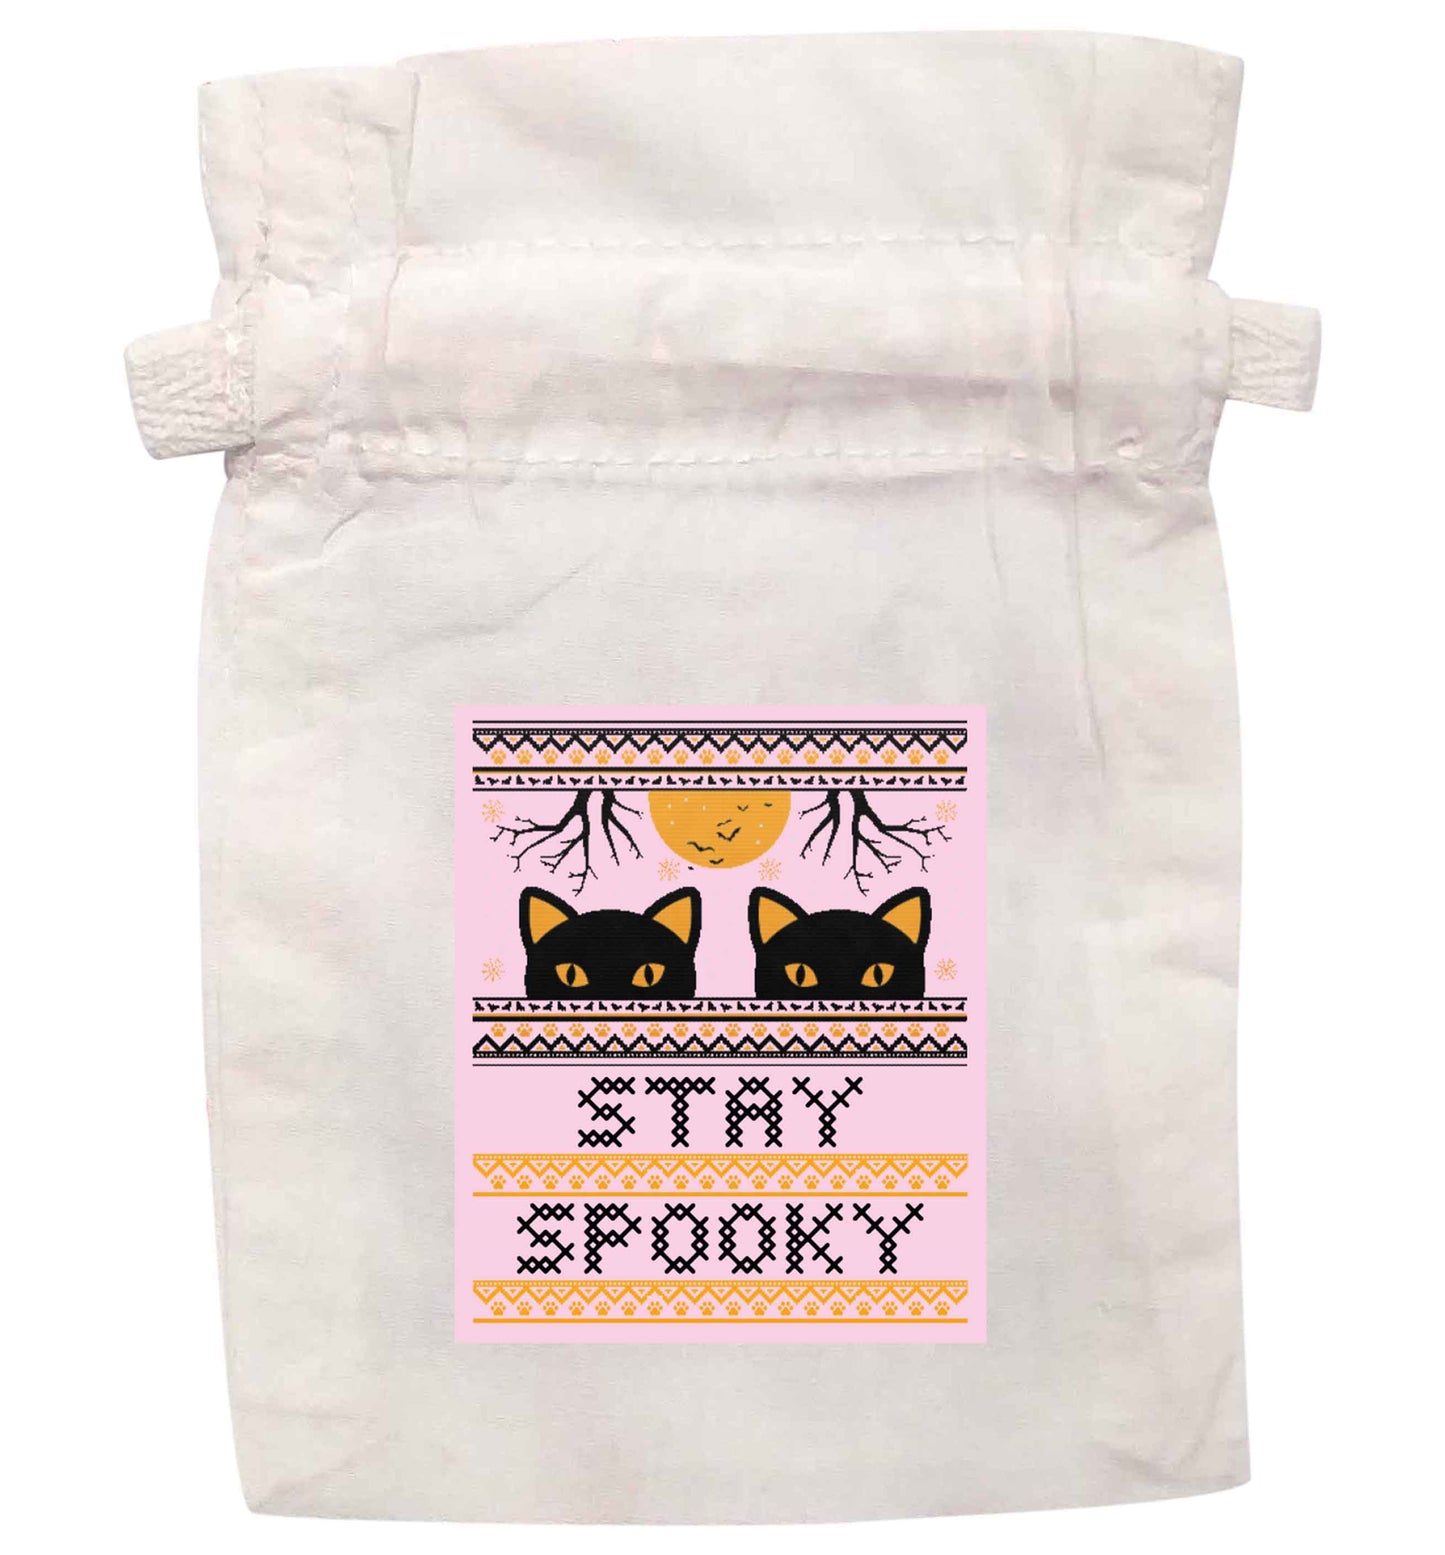 Stay spooky | XS - L | Pouch / Drawstring bag / Sack | Organic Cotton | Bulk discounts available!